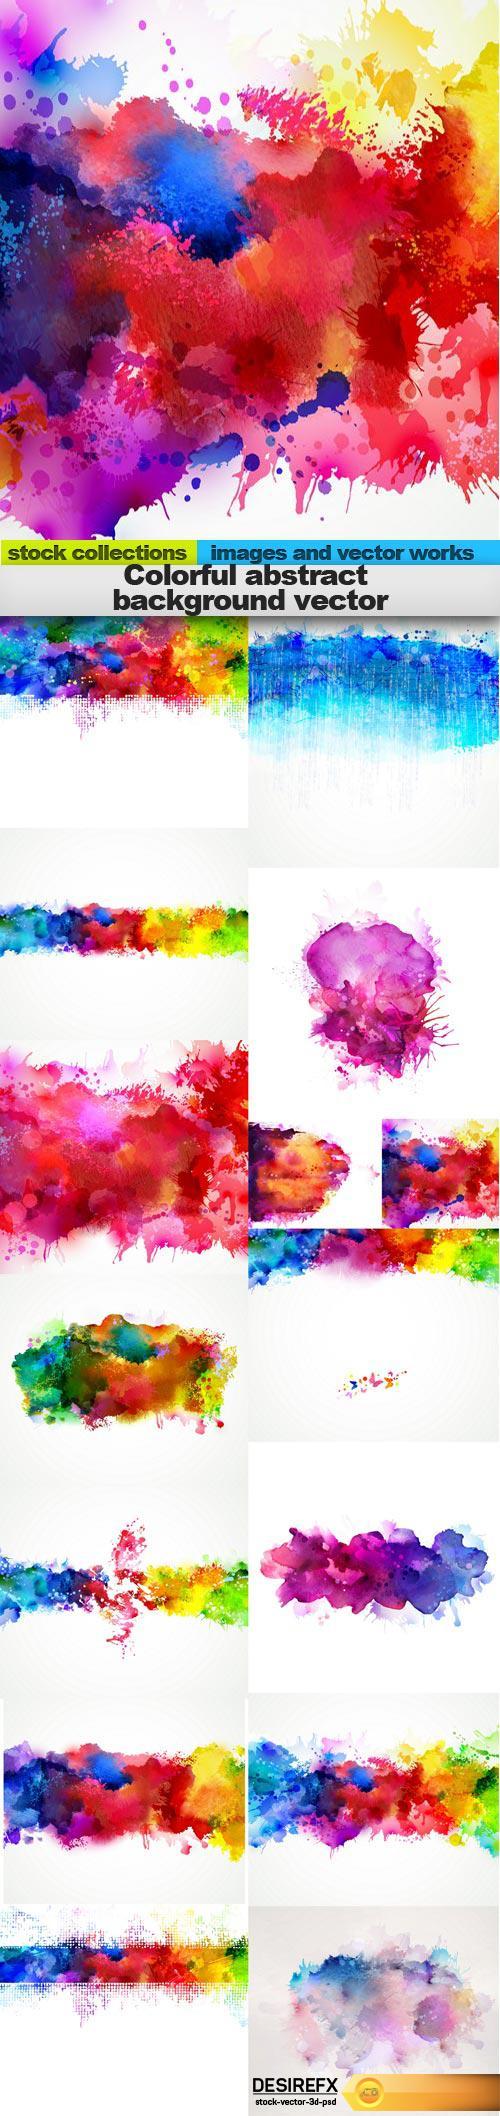 Colorful abstract background vector, 15 x EPS